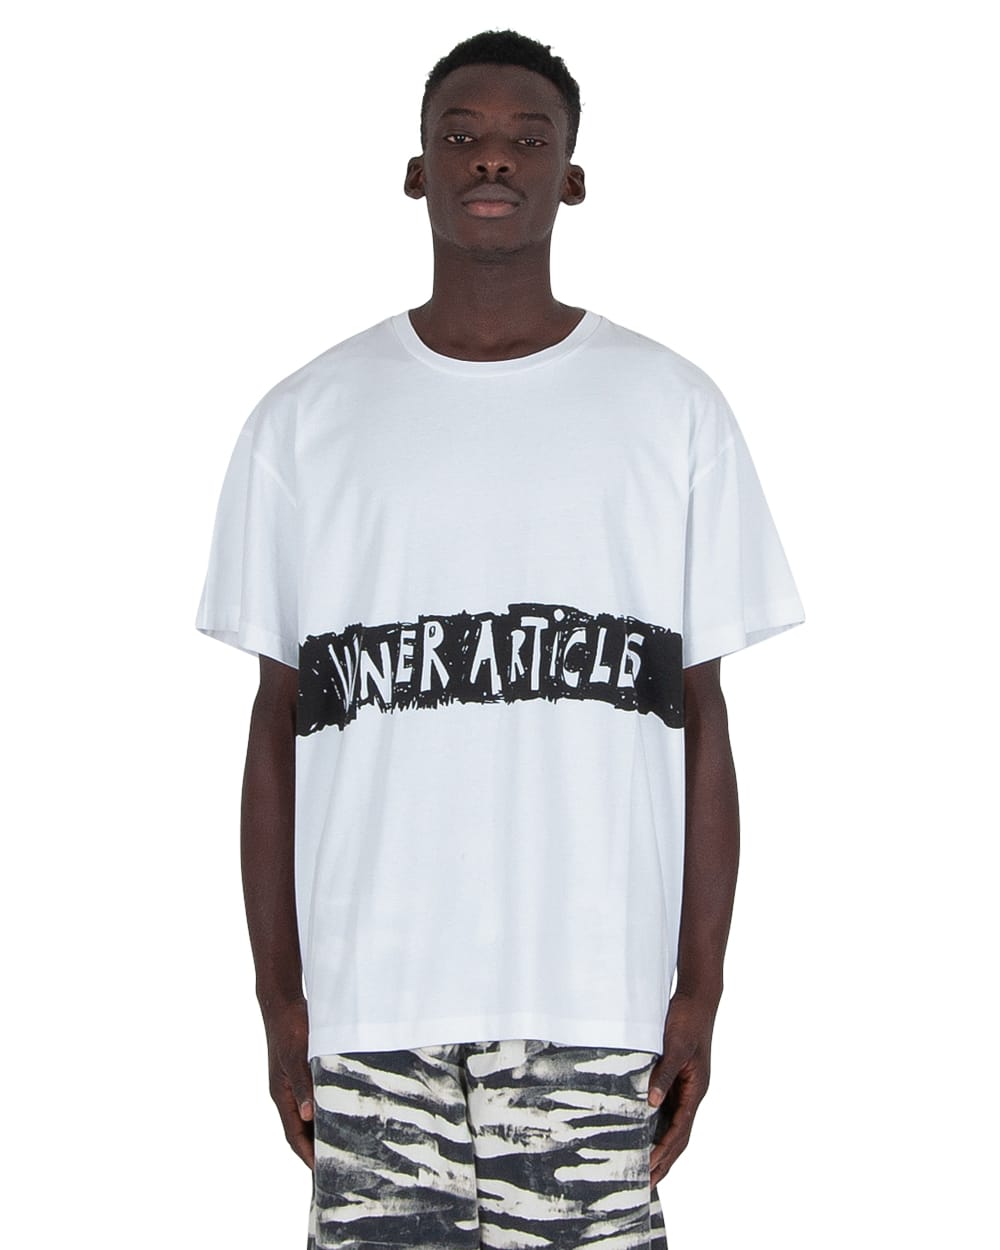 Vyner Articles Vision Scribble Tee